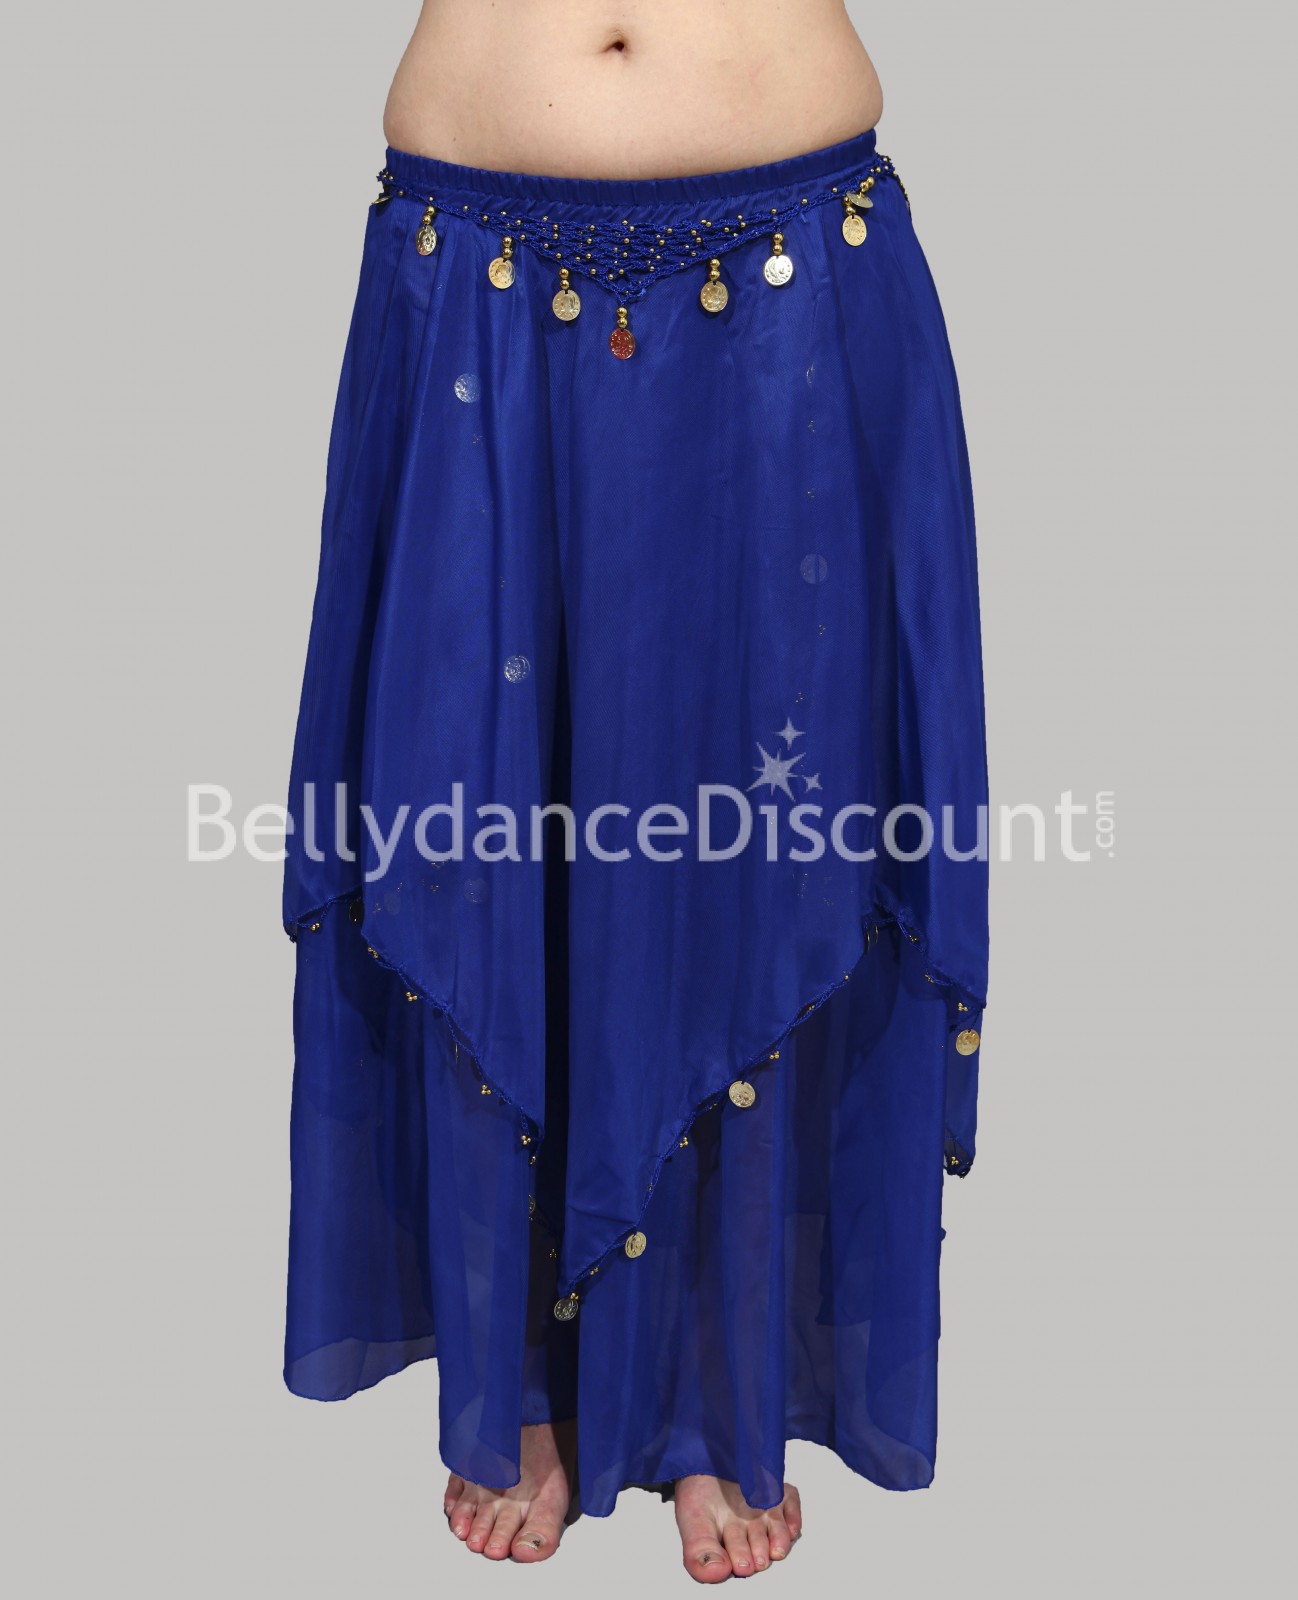 Dark blue belly dance skirt with lining - 20,70